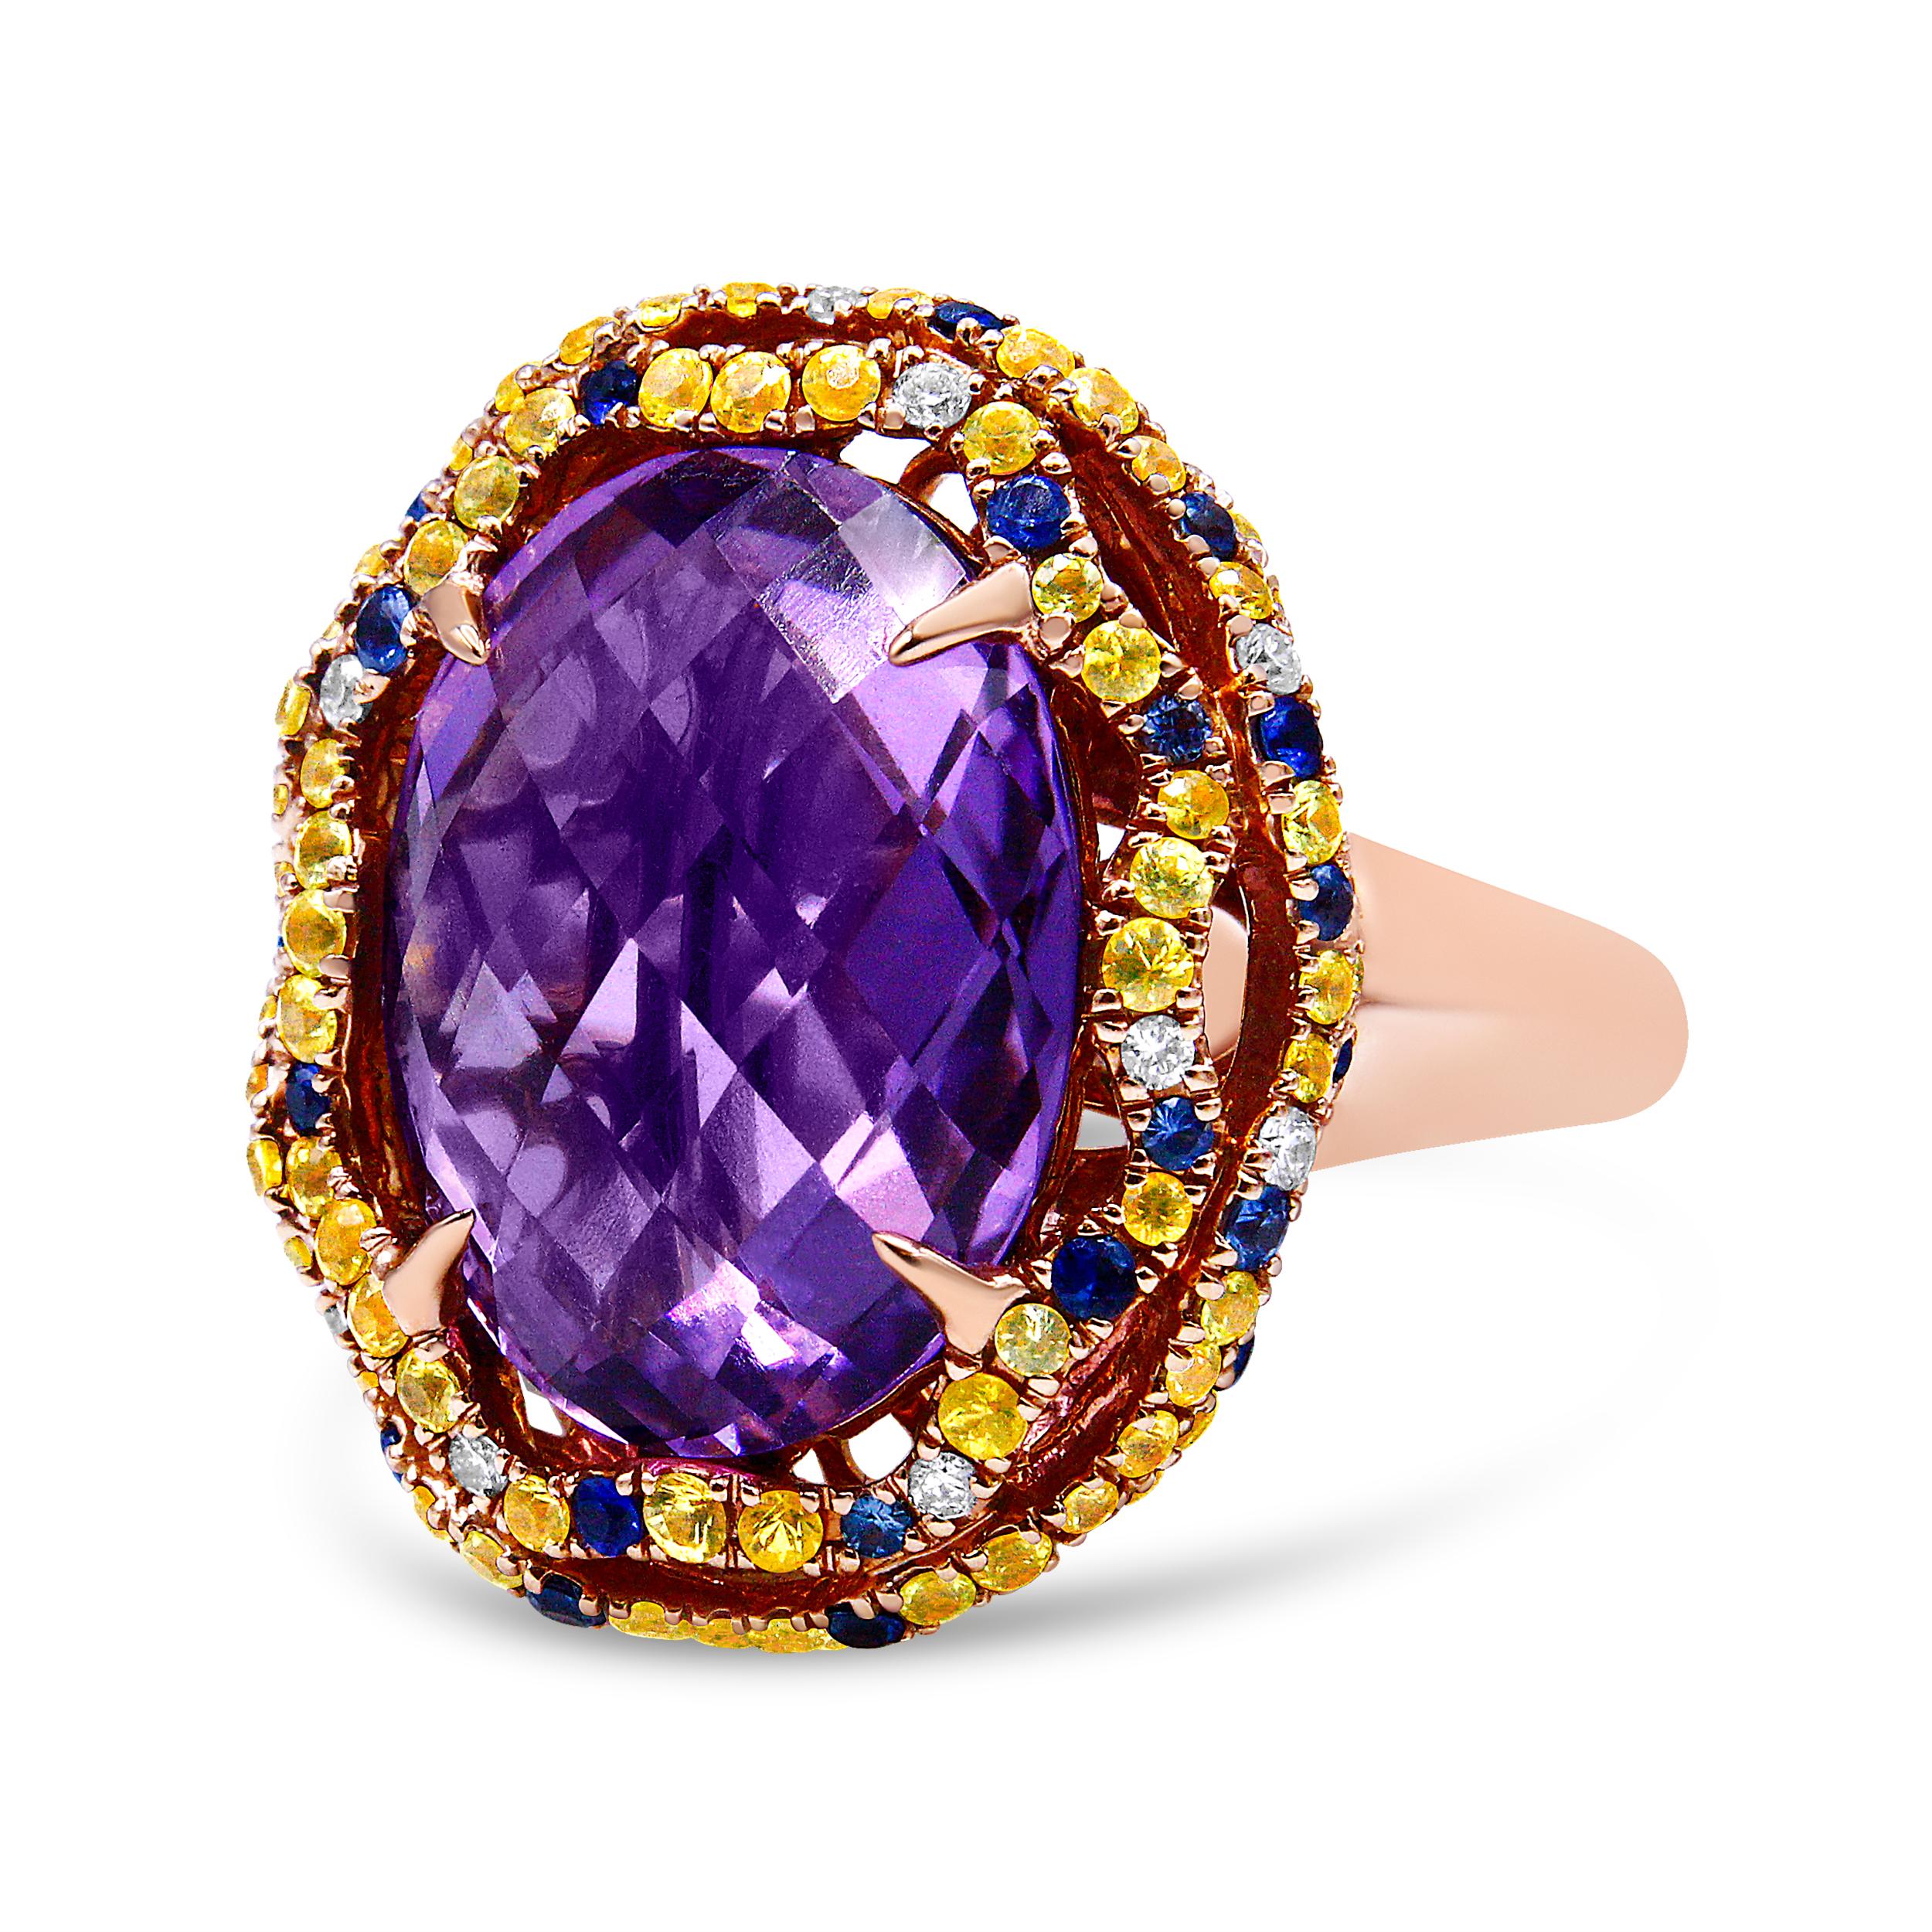 There are no words to truly describe this vividly colorful ring set in 18K Yellow and Rose Gold. The ring starts with a masterfully cut, checkboard purple amethyst set with 4 claw prongs. This magnificent purple stone measures 12mm x 11mm and gives